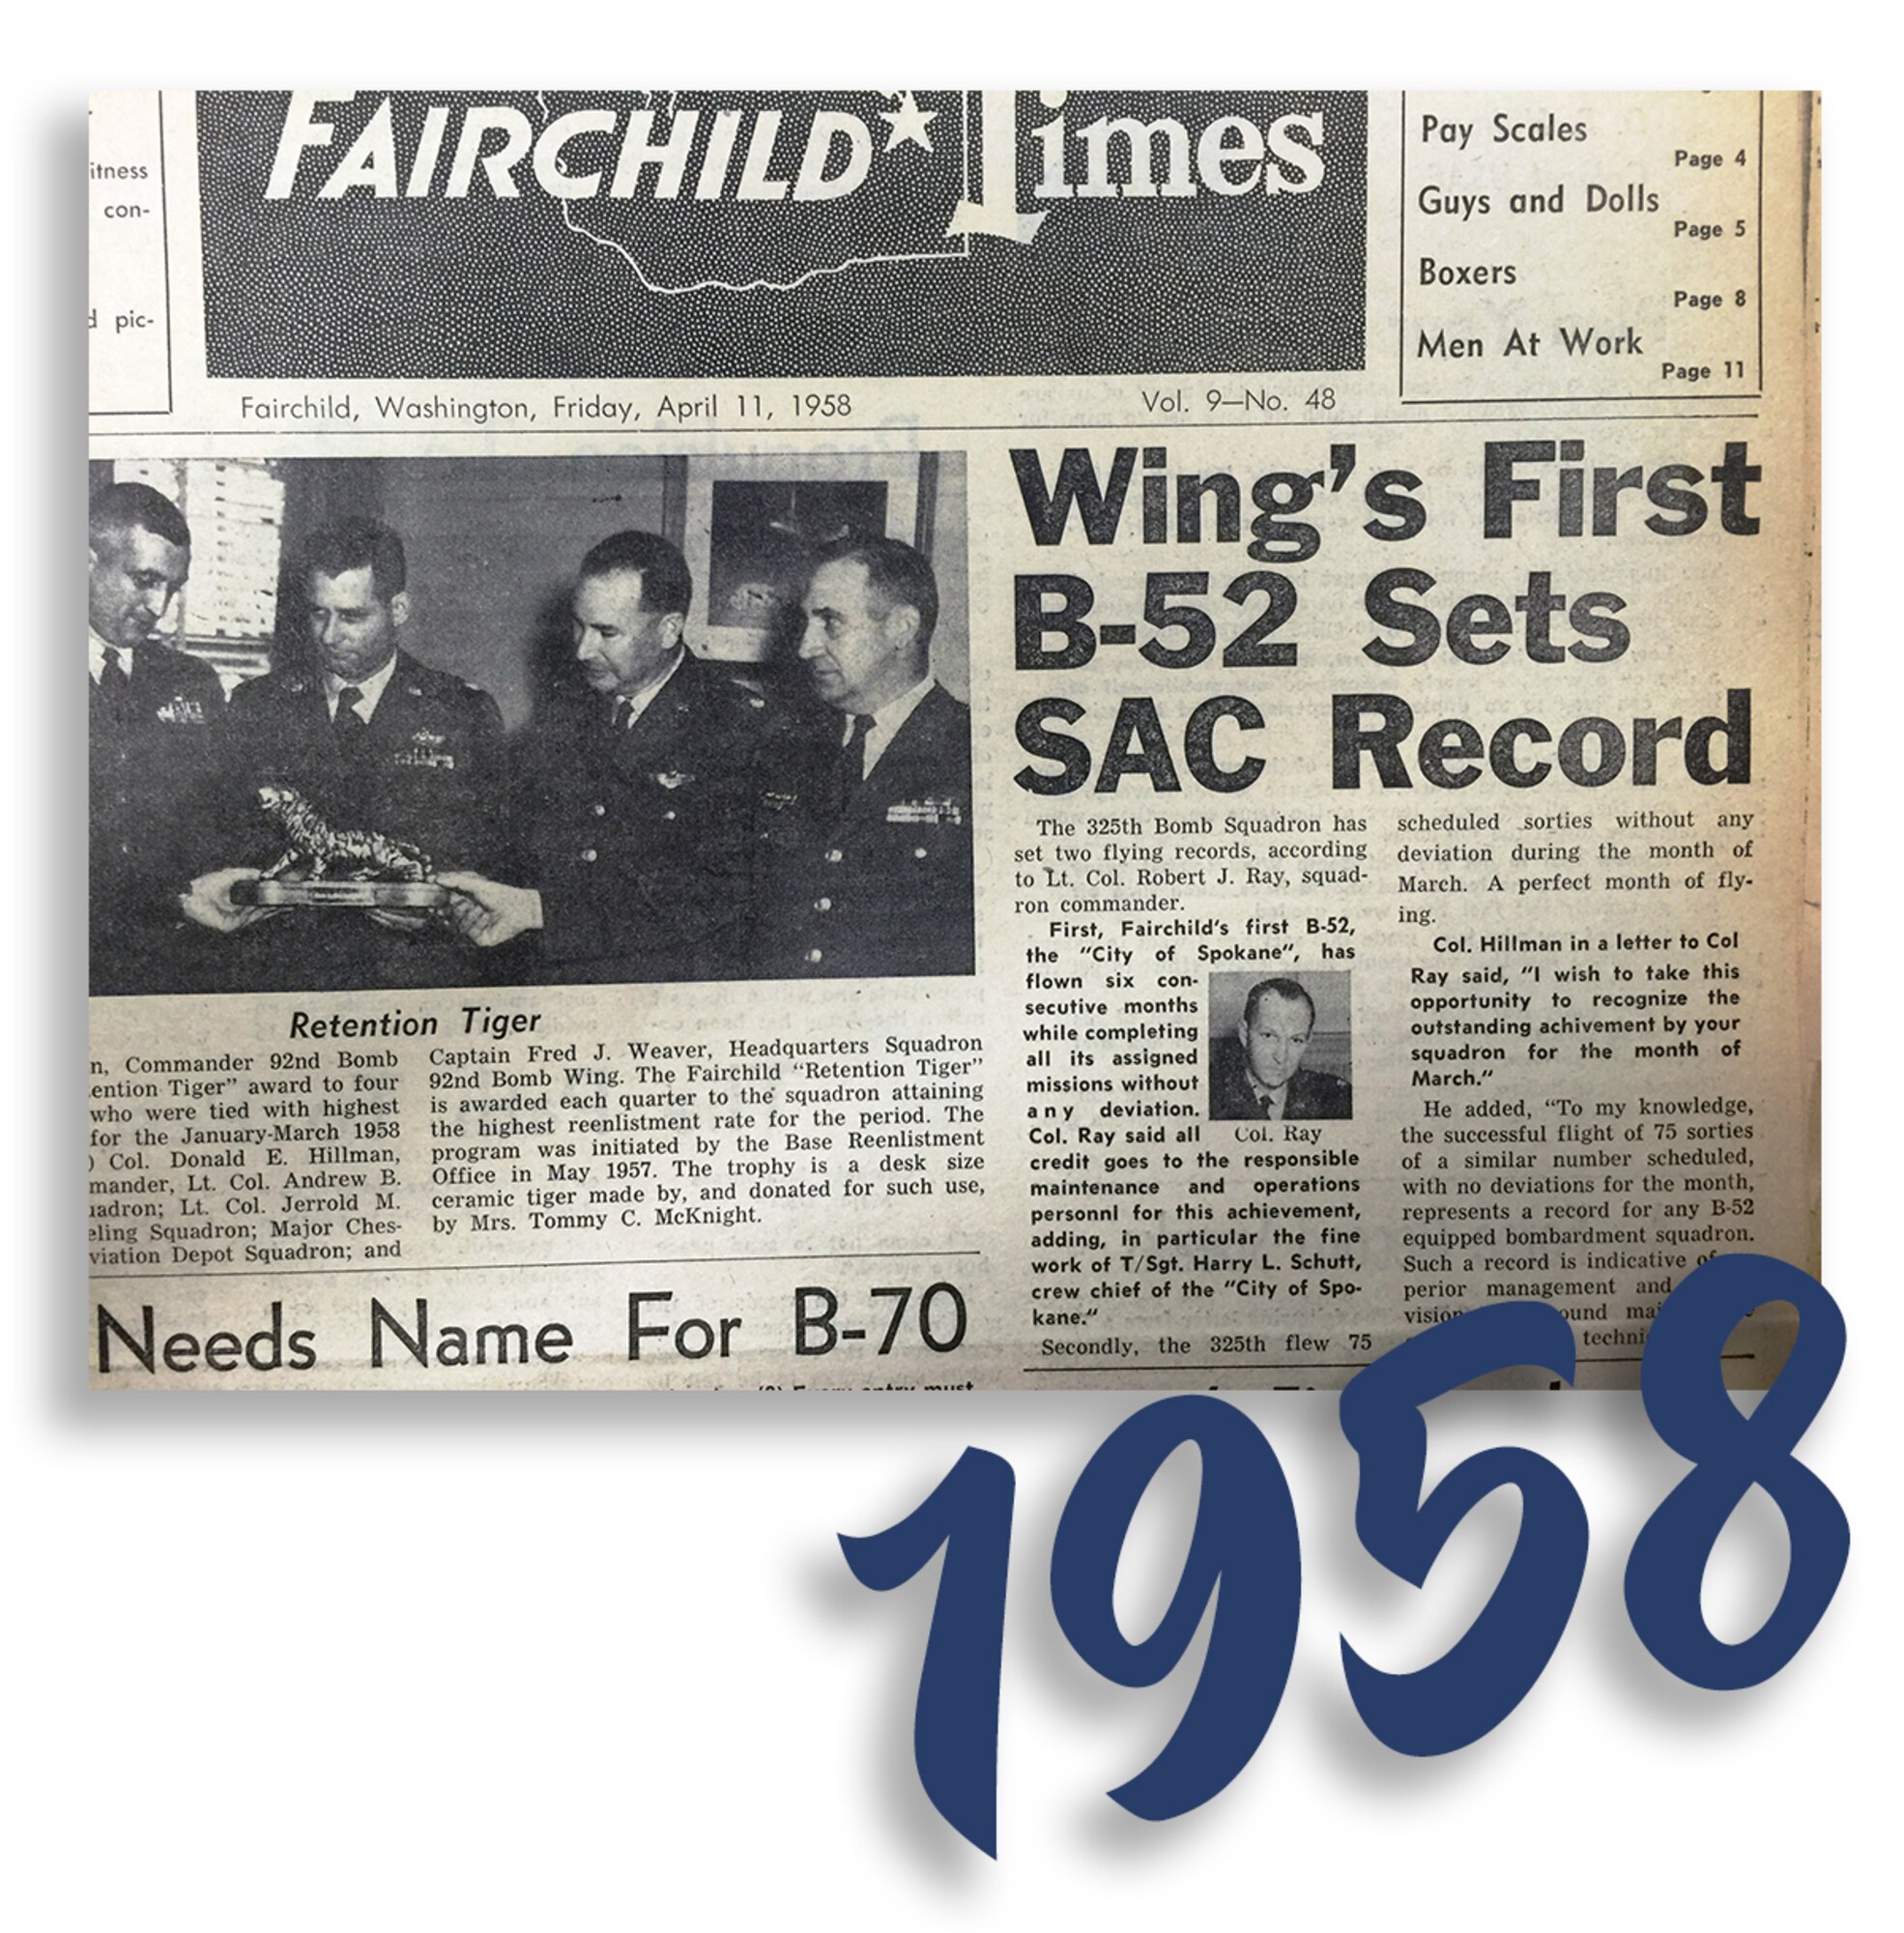 Fairchild Times, Vol. 9 - No. 48, published Friday, April 11, 1958. "Wing's First B-52 Sets SAC Record." (Courtesy Photo)